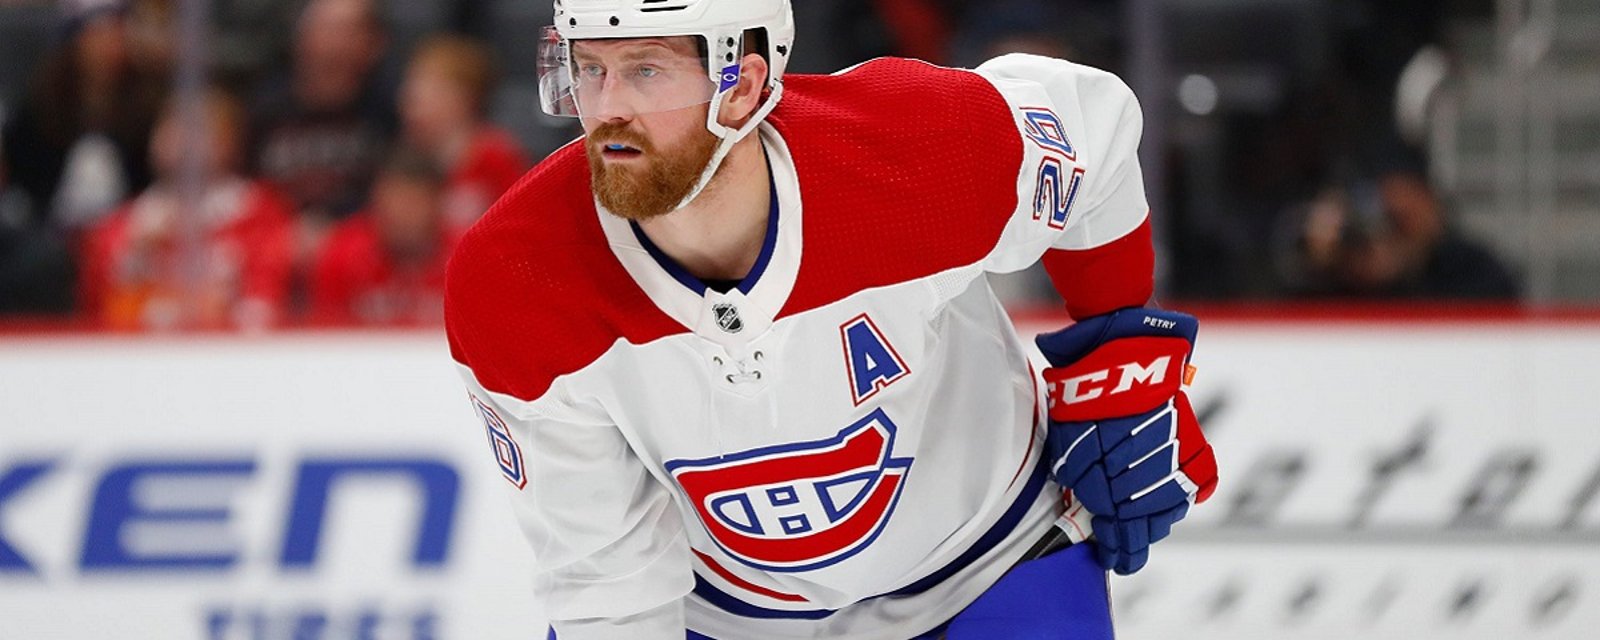 Dominique Ducharme provides an update on Jeff Petry's freak injury.